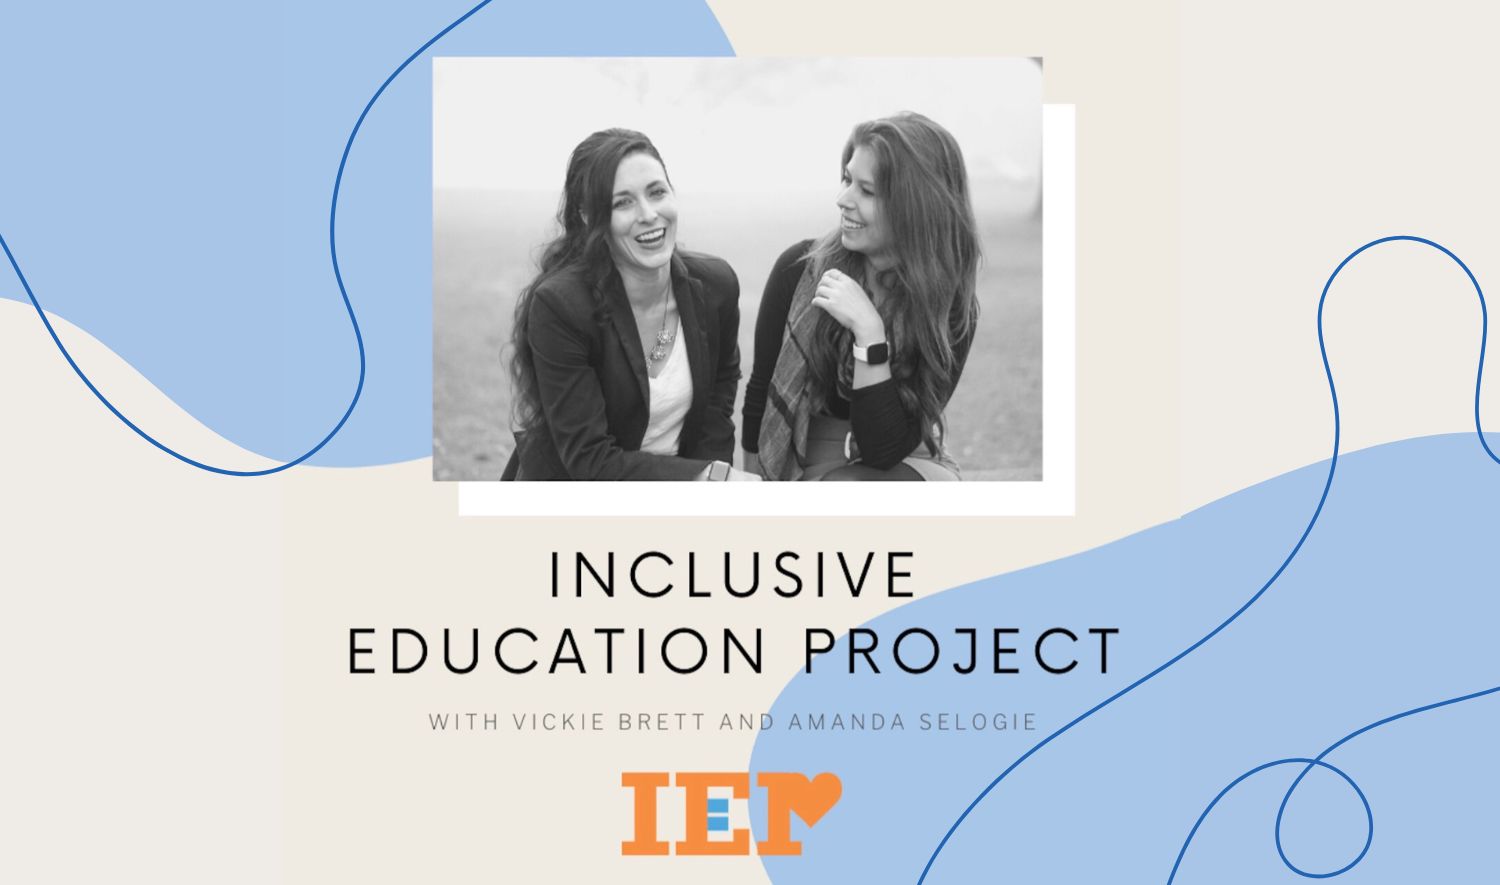 inclusive education project (IEP) podcast with vickie brett and amanda selogie